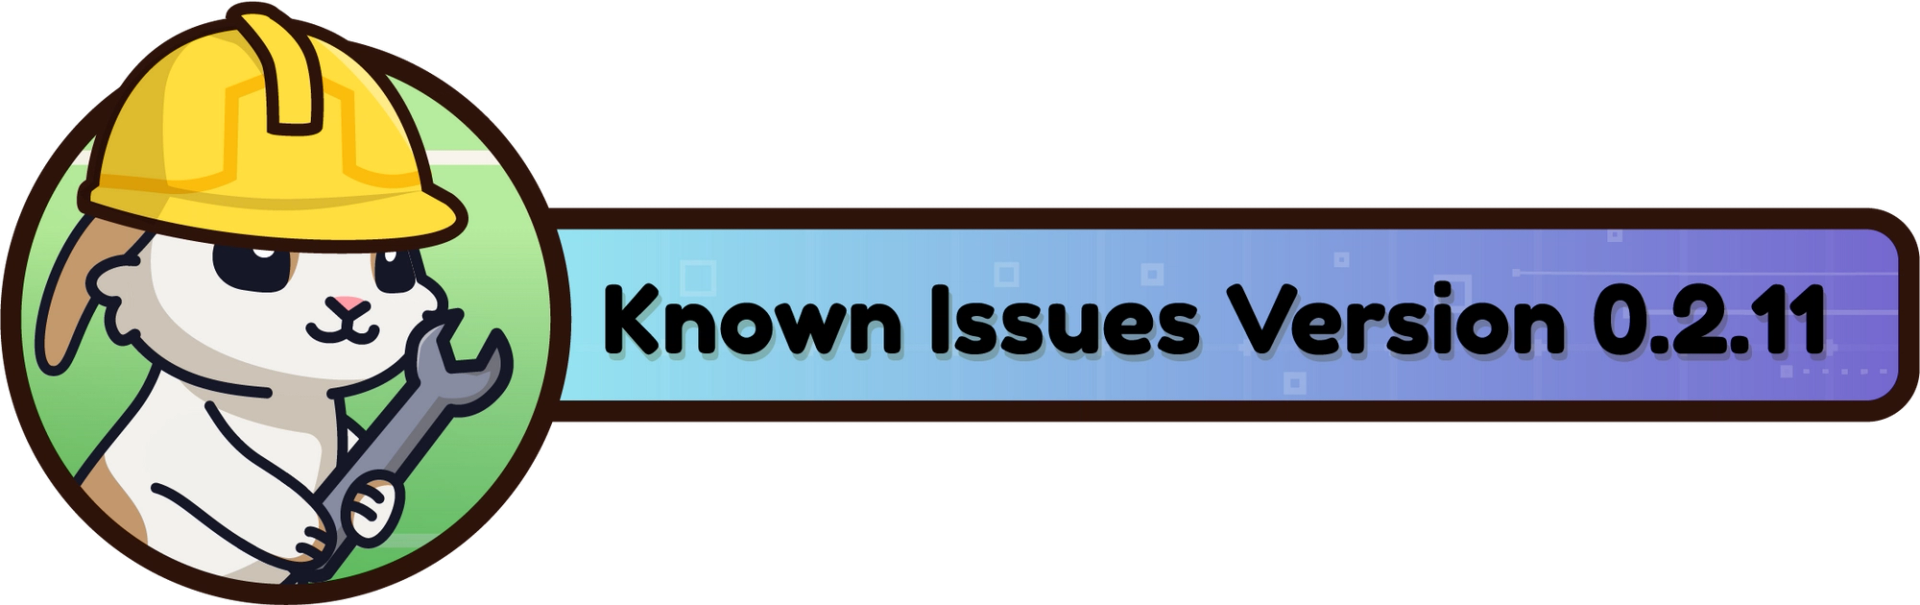 Known Issues Version 0.2.11